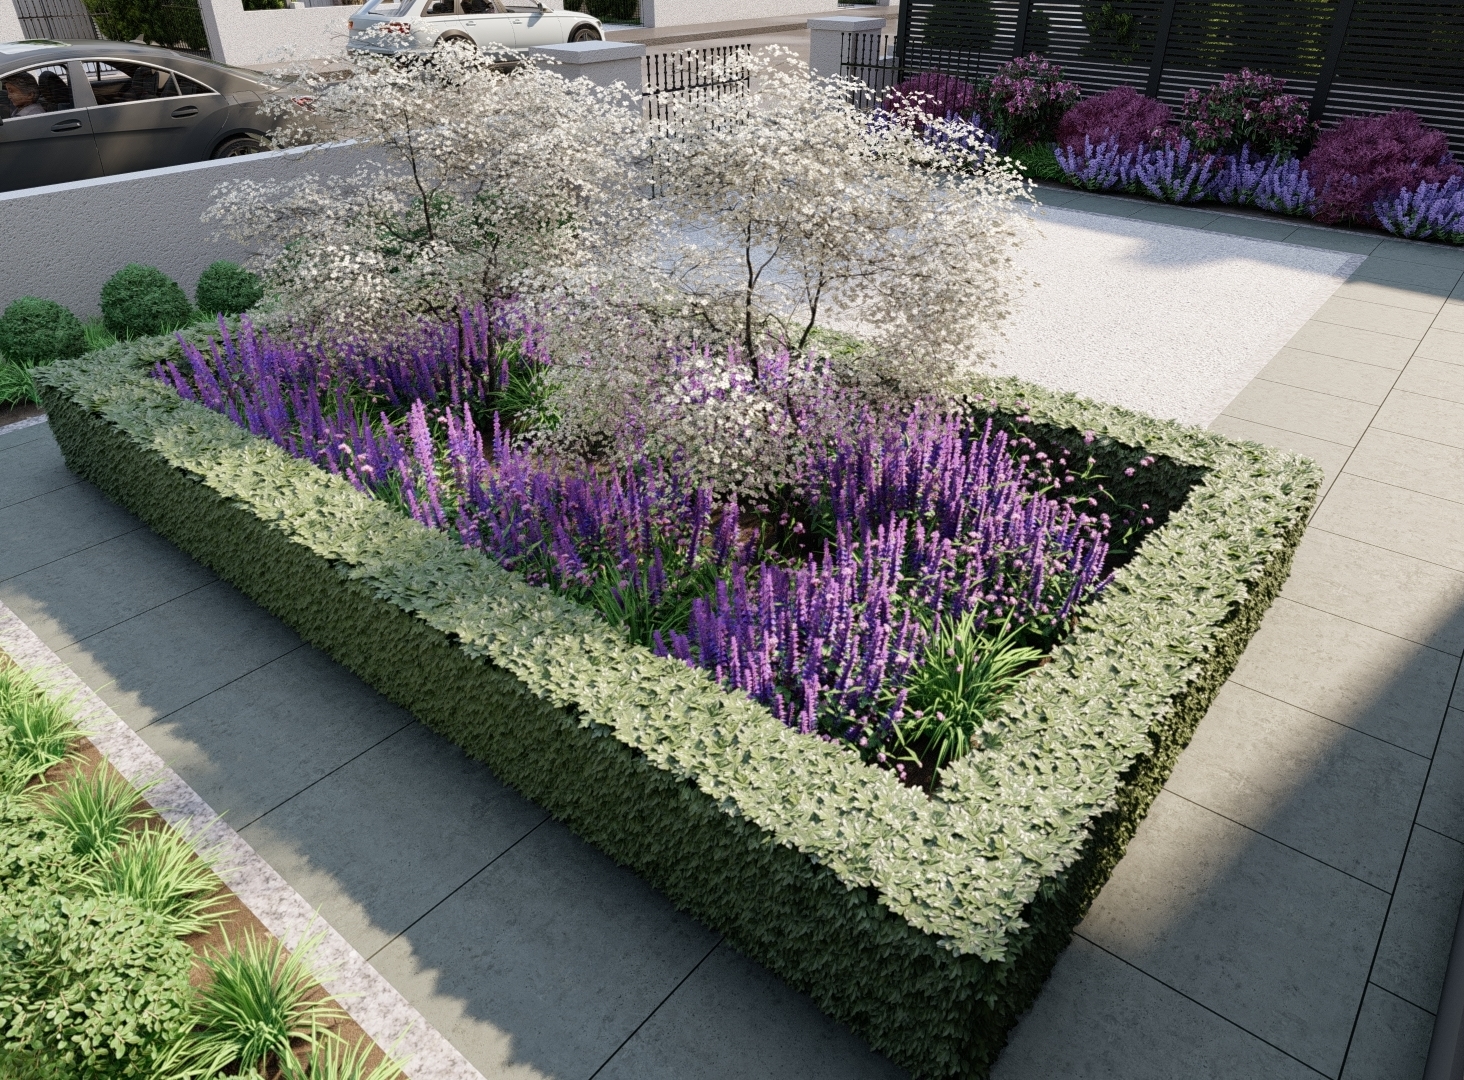 3D Design Visual illustrating a feature island bed, planted with clipped Buxus hedging, a central feature tree and mixed herbaceous flowering plants | Owen Chubb Garden Design, Tel 087-2306128